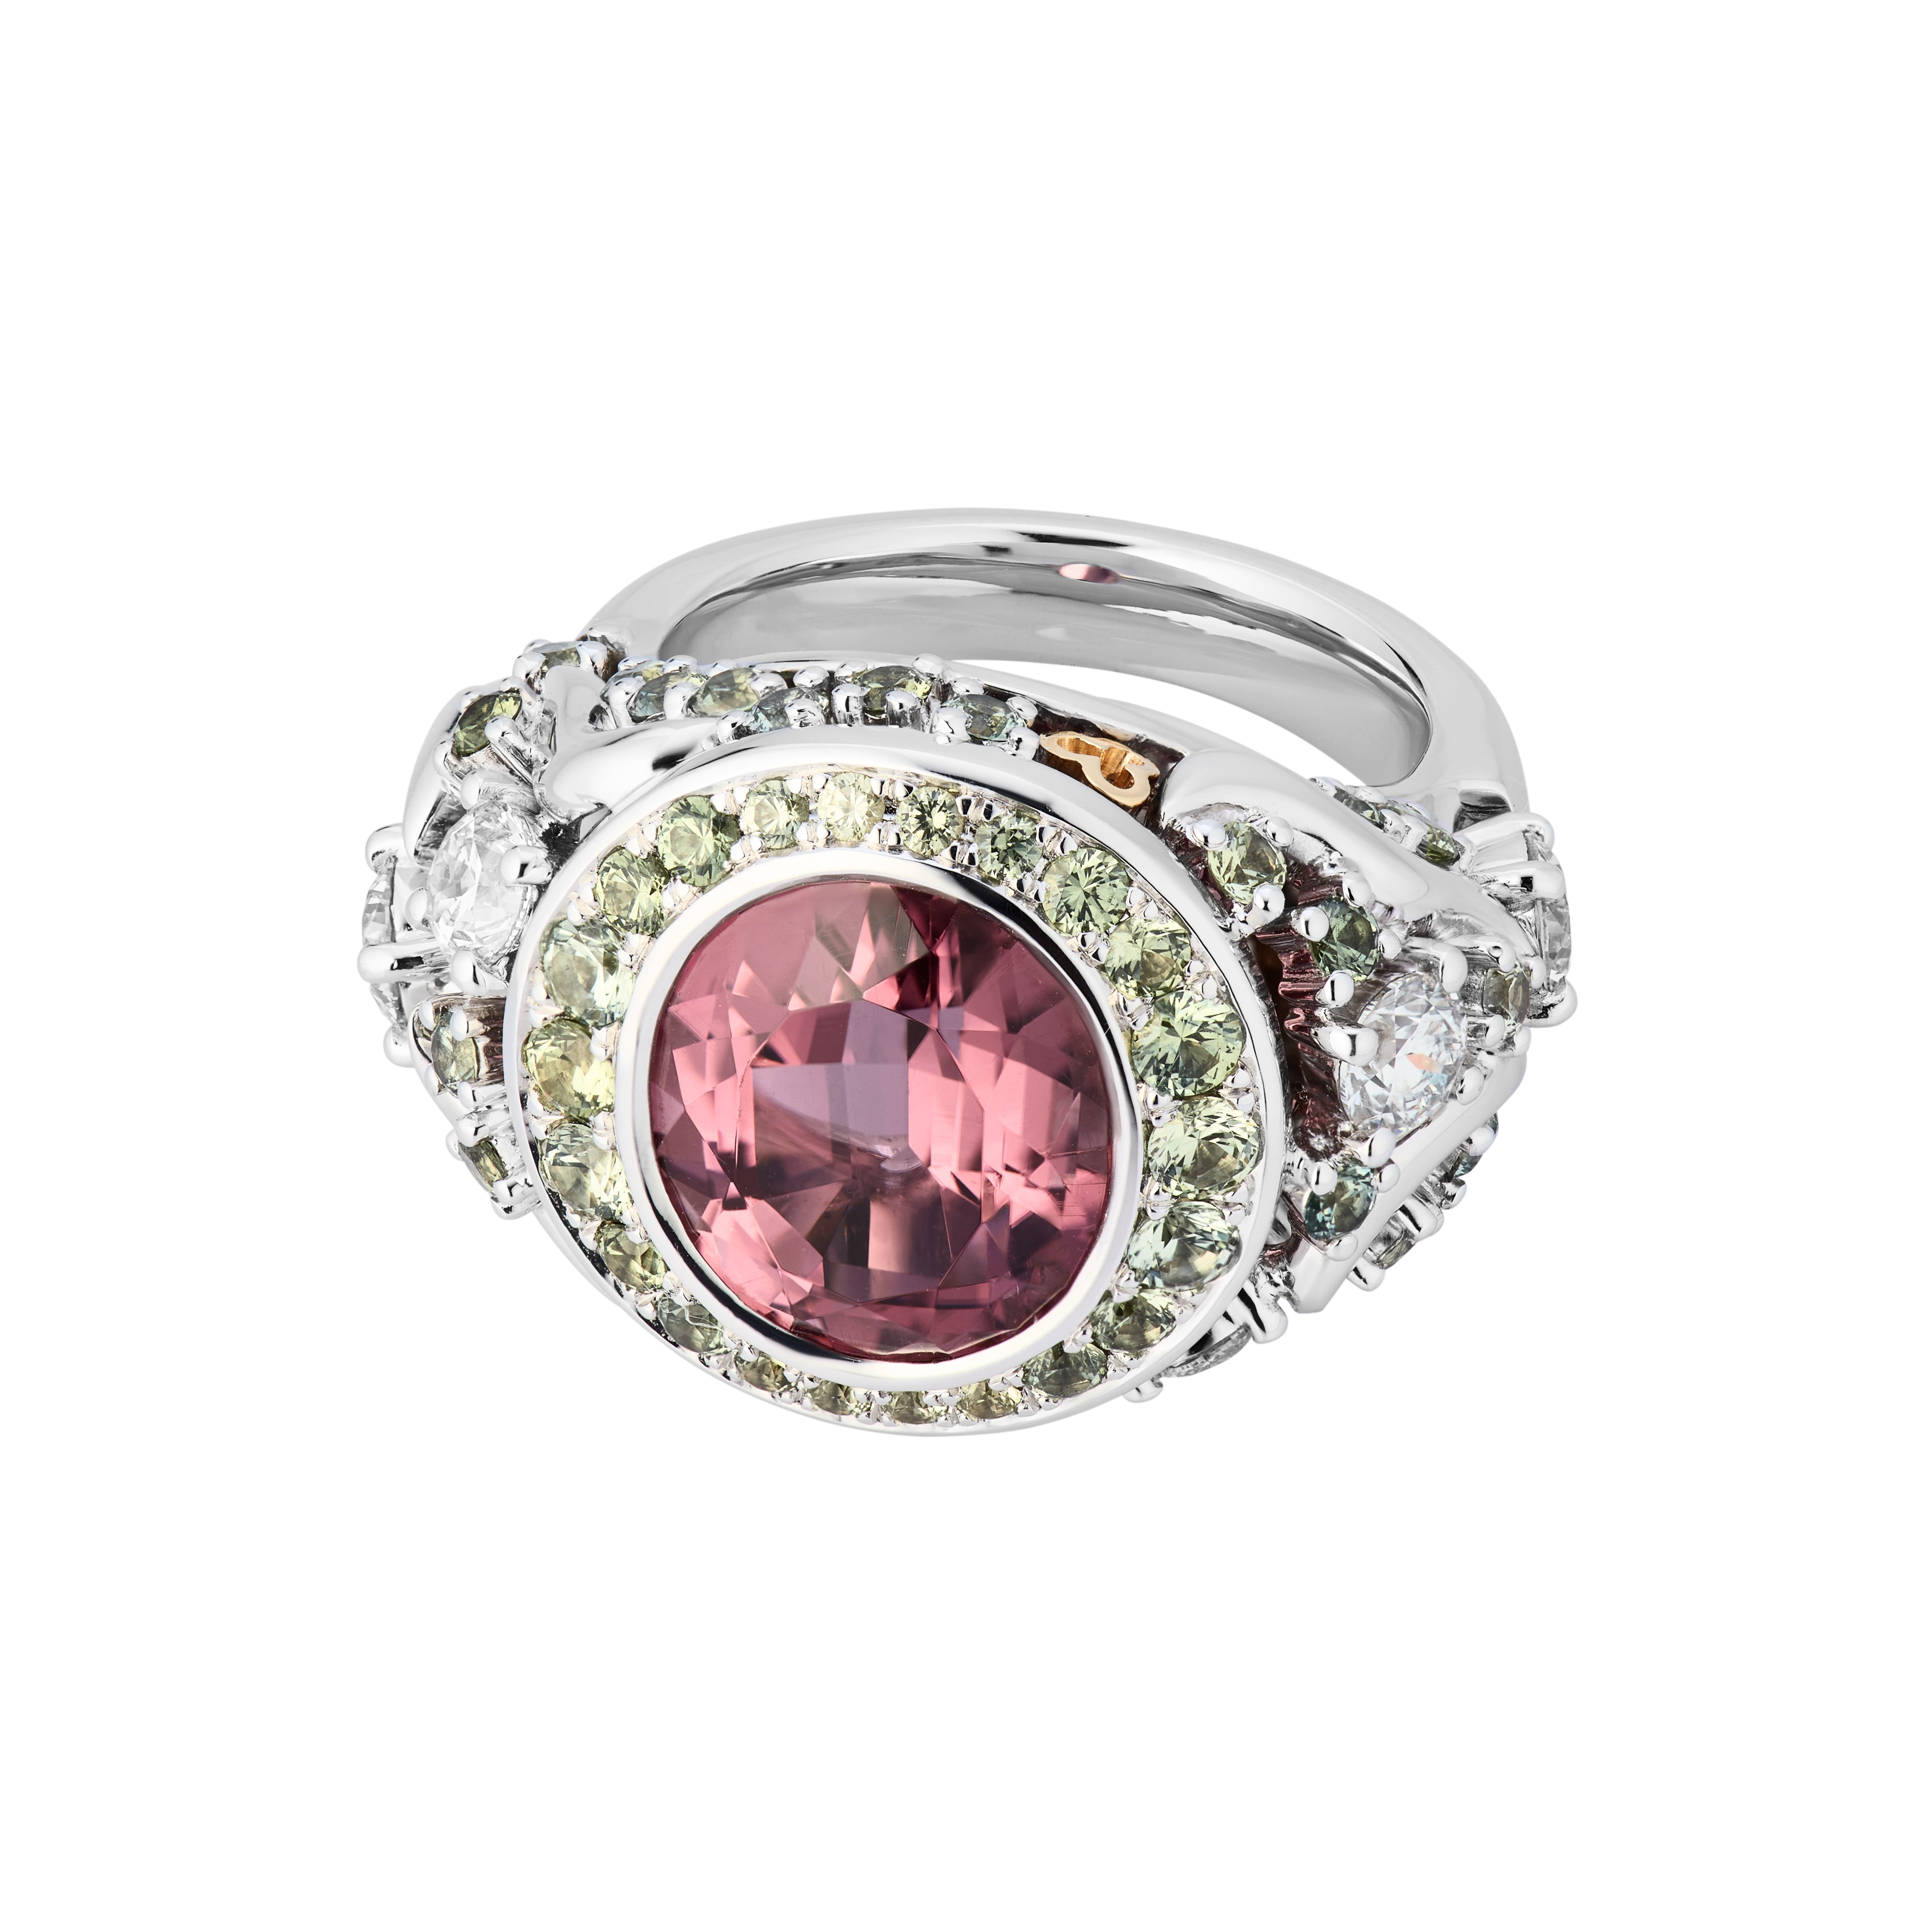 Gioia cocktail ring 18kt white & yellow gold with oval, natural pink tourmaline